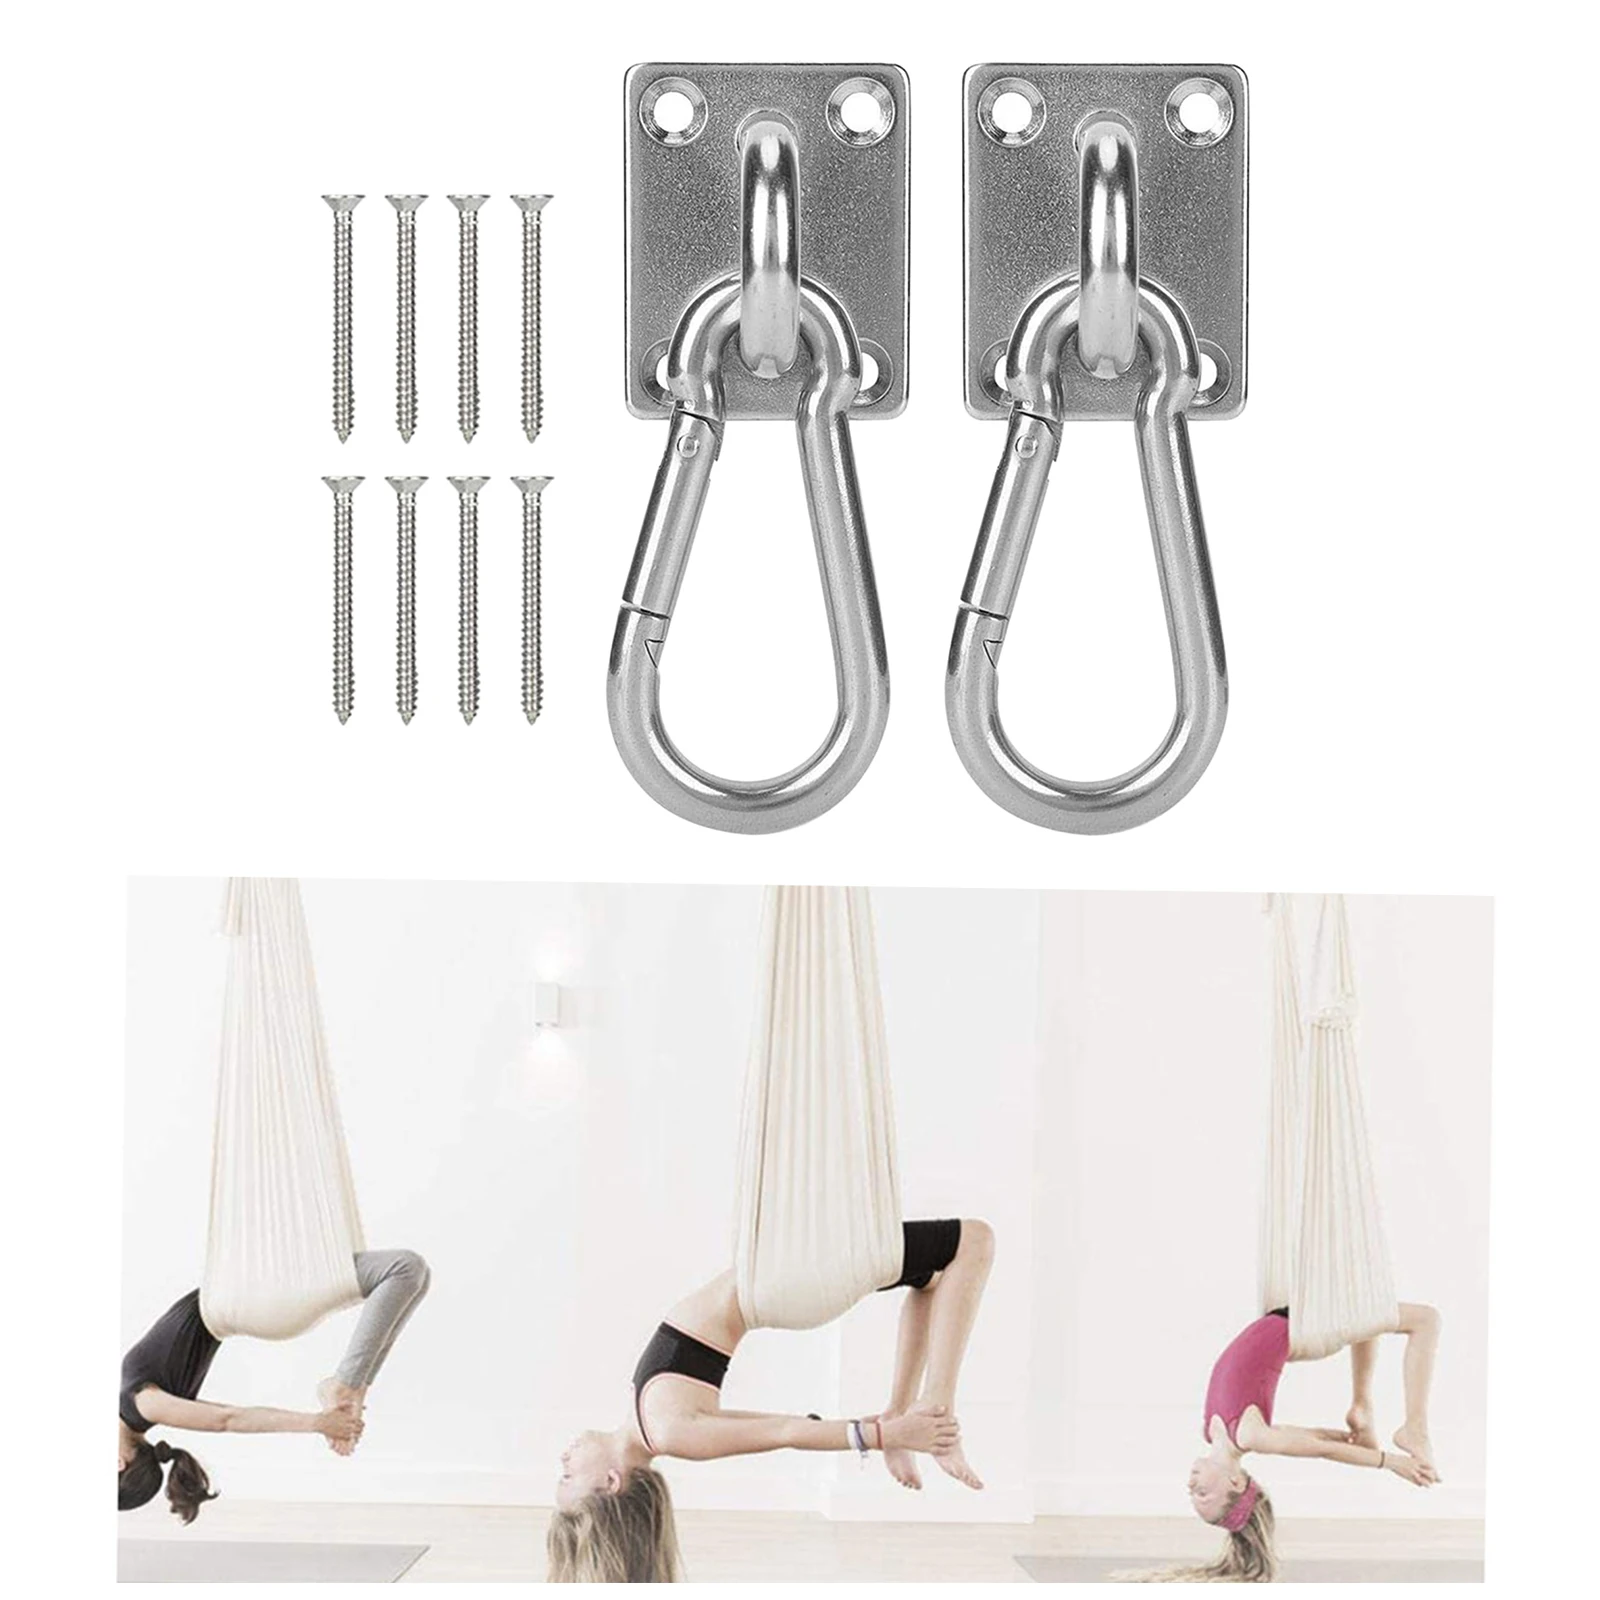 Ceiling Mount Anchor Hooks,  Trainer Wall Mounted  Strap Trainer er for Battle Rope,Yoga Swings,Hammock